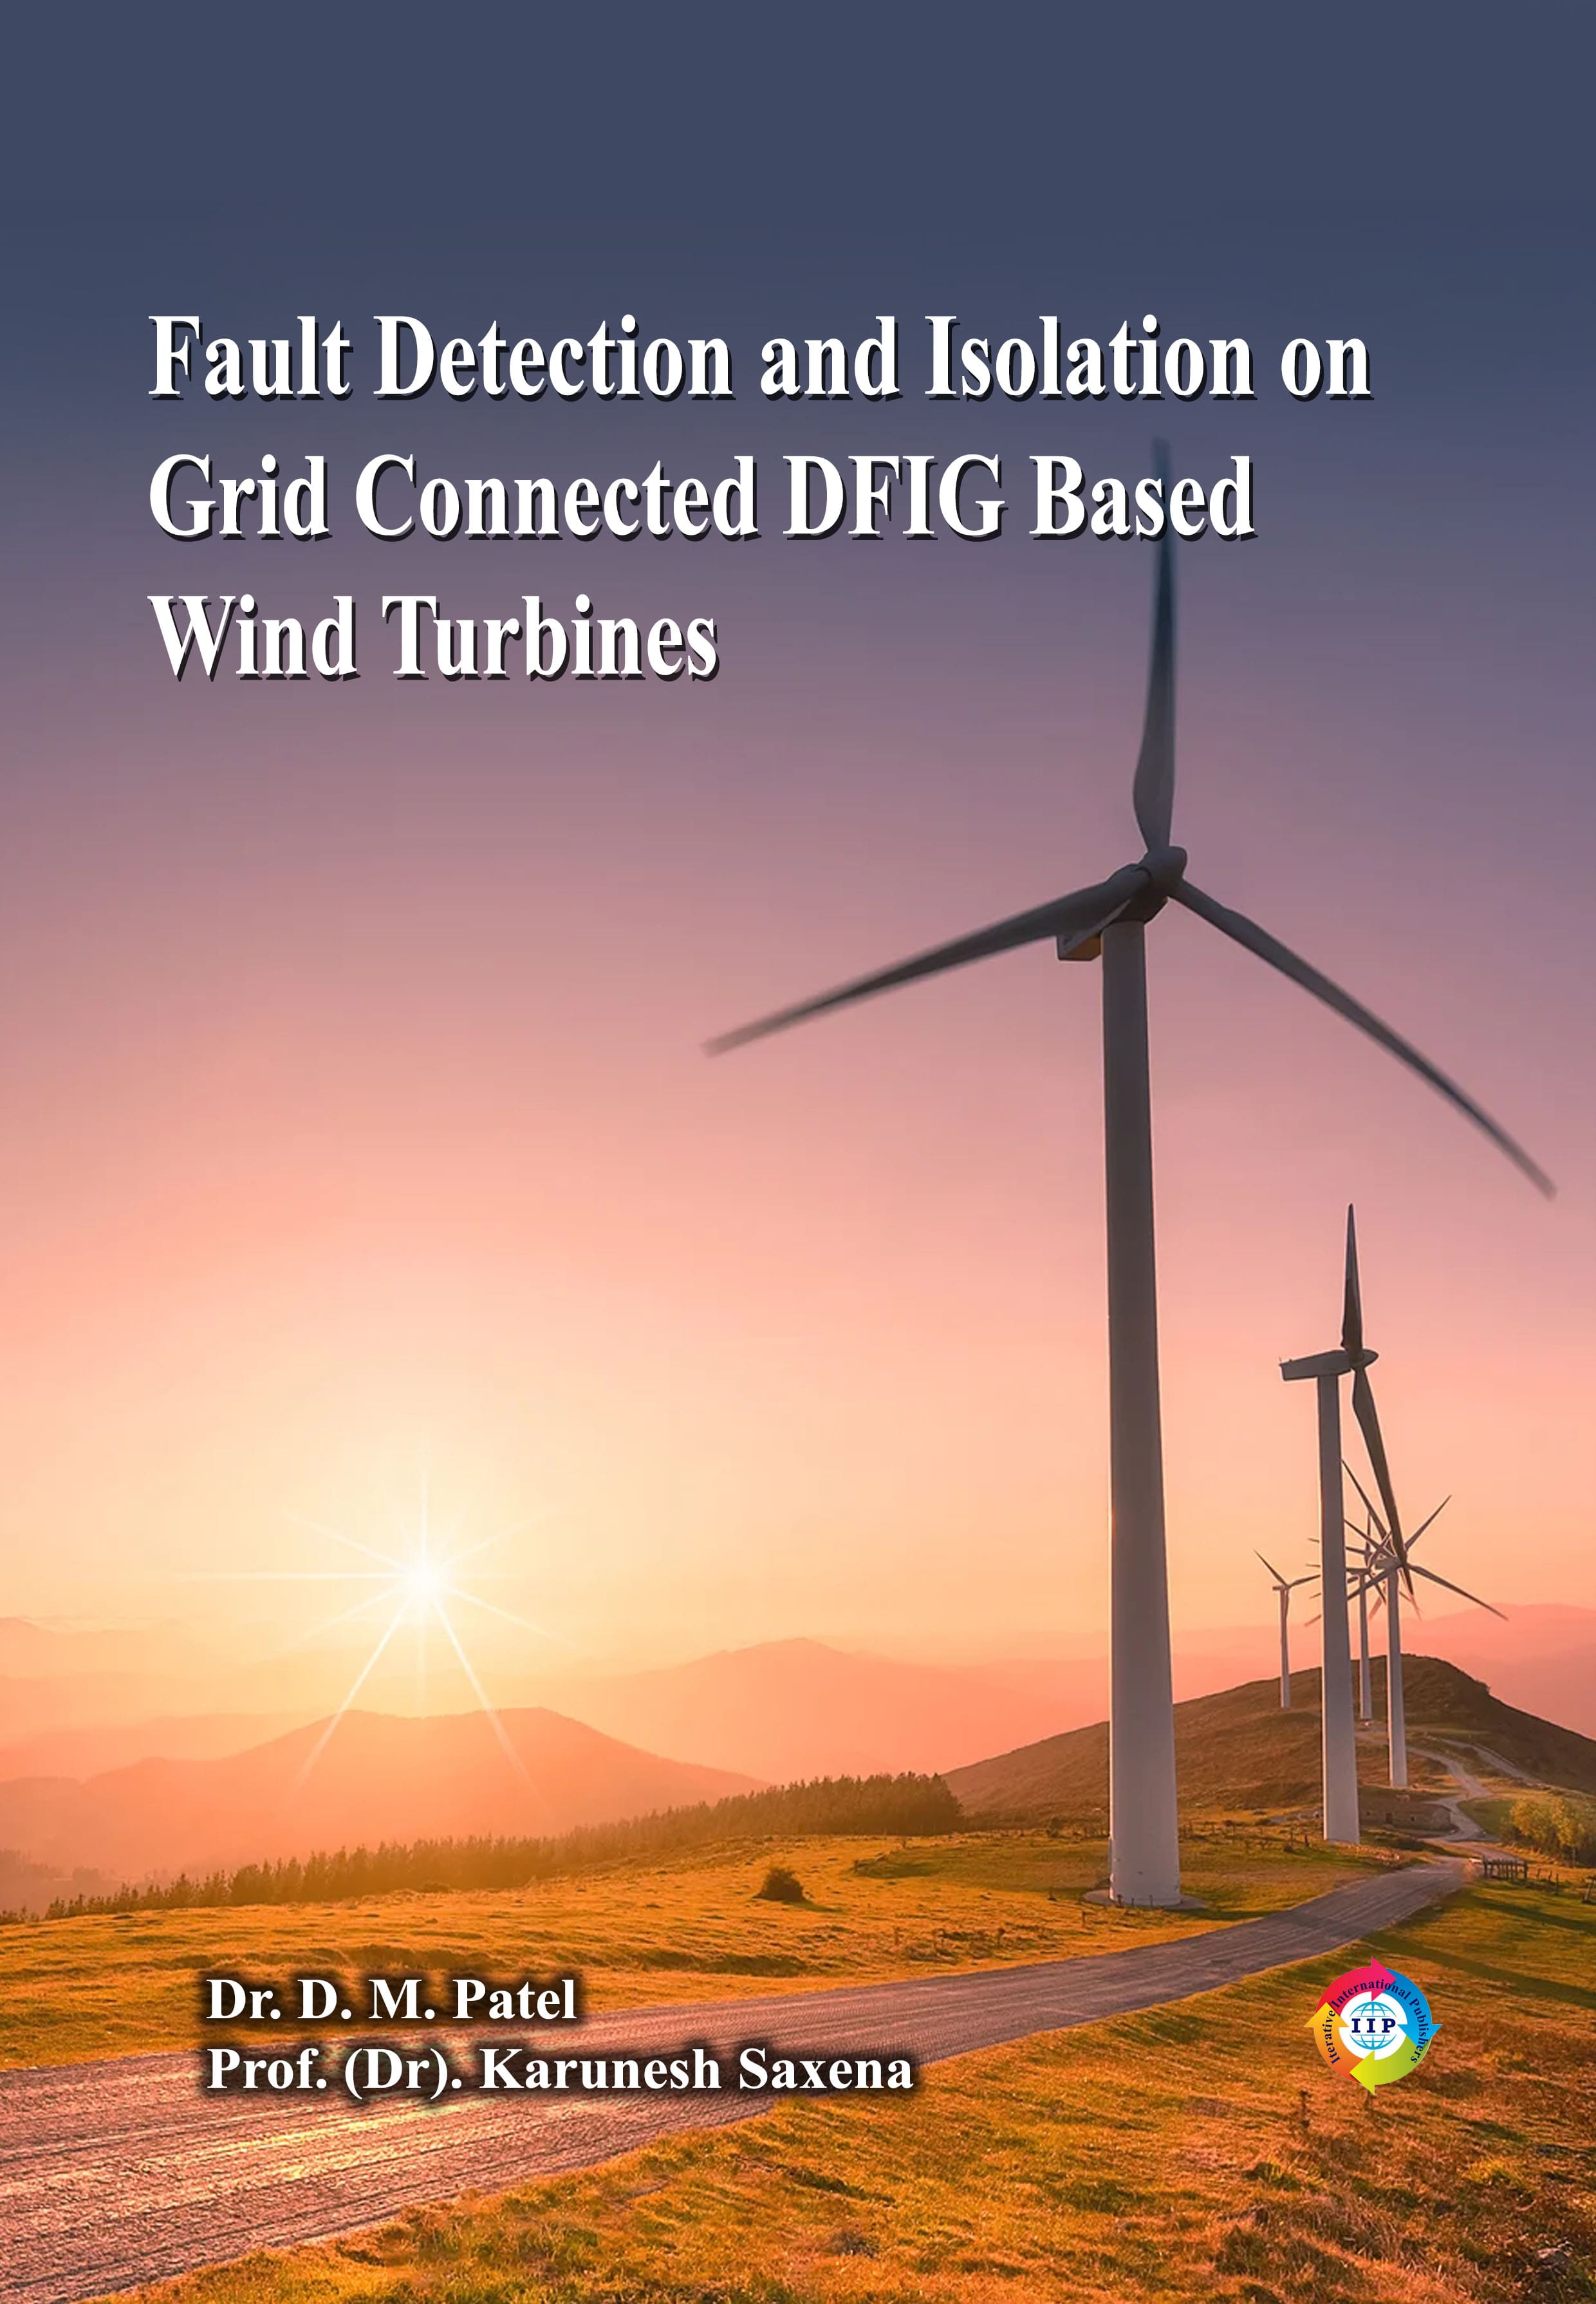 FAULT DETECTION AND ISOLATION ON GRID CONNECTED DFIG BASED WIND TURBINES